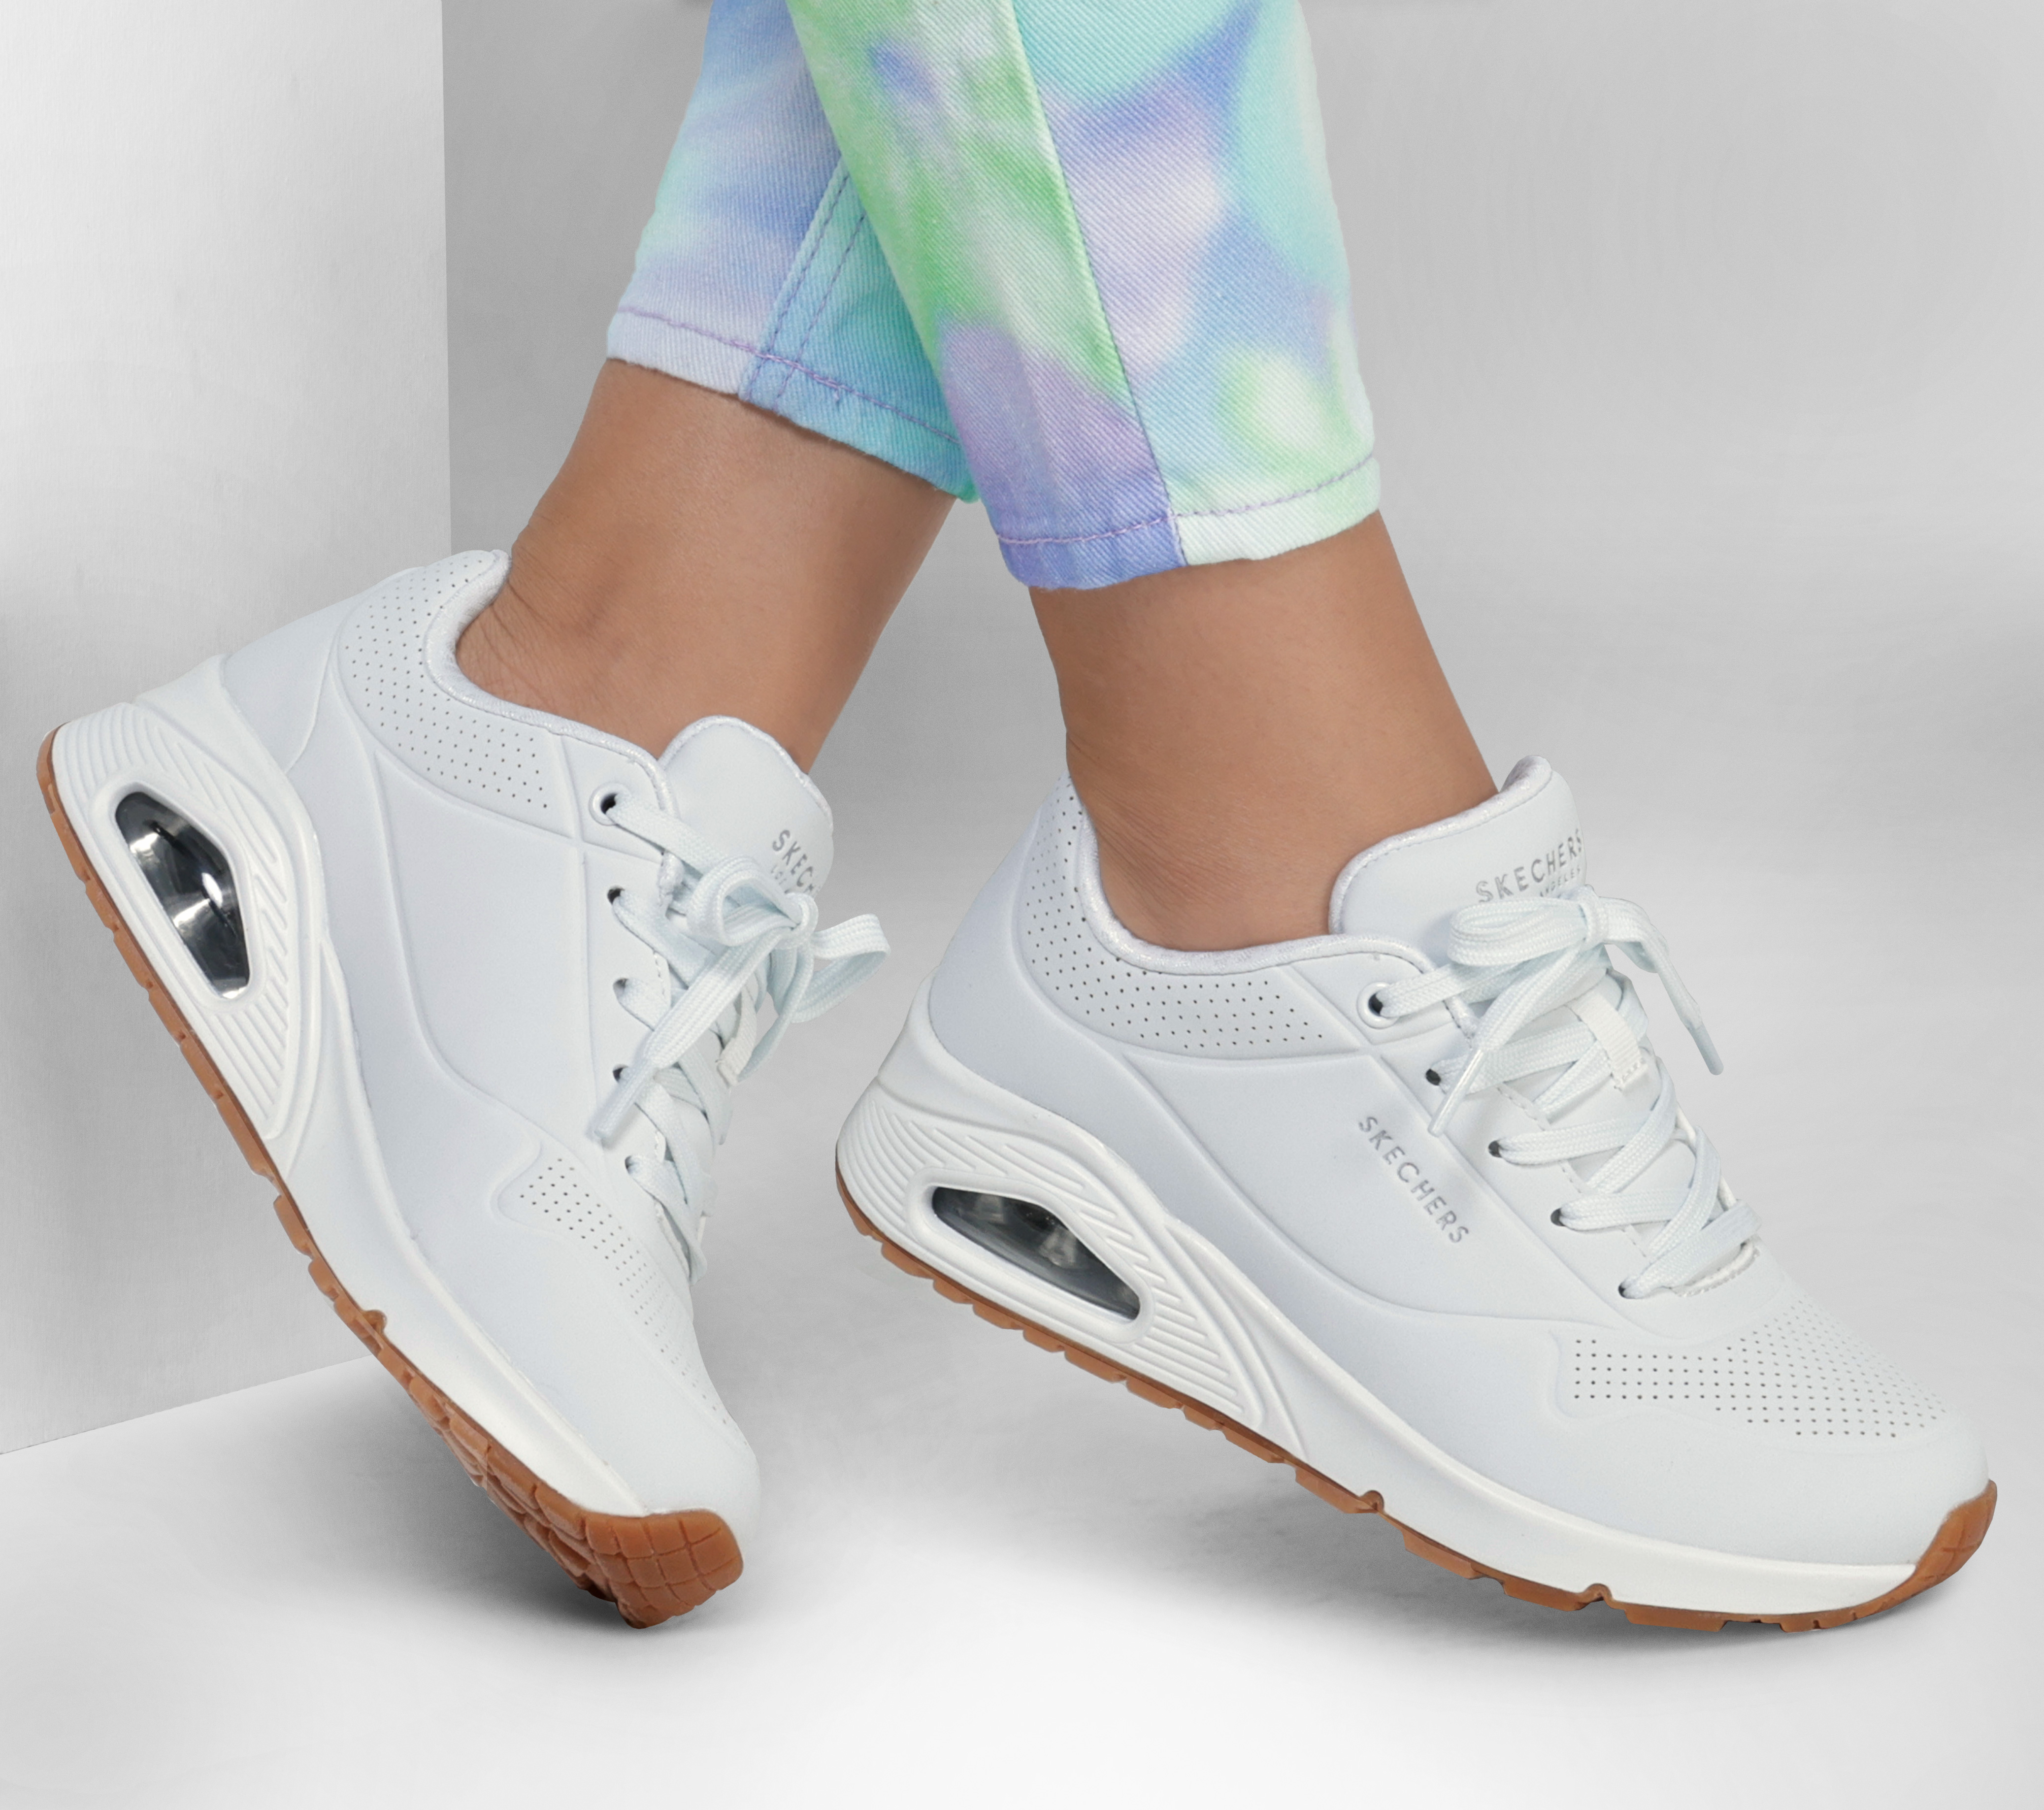 Skechers, Womens Uno Stand On Air